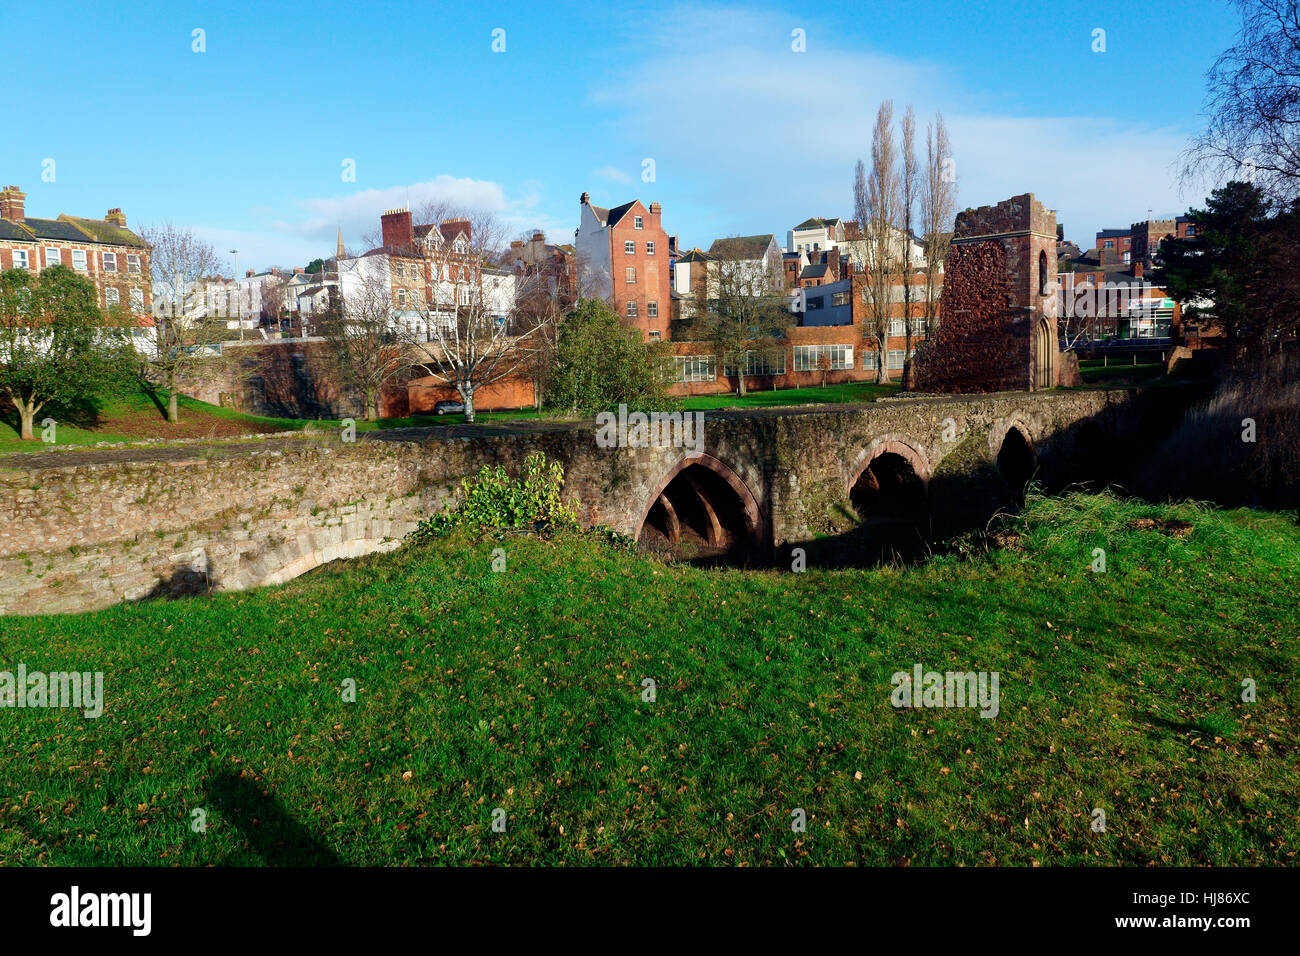 EXETER MEDIEVAL BRIDGE WEST SIDE SHOEING ARCHES AND ST EDMUNDS TOWER. Stock Photo